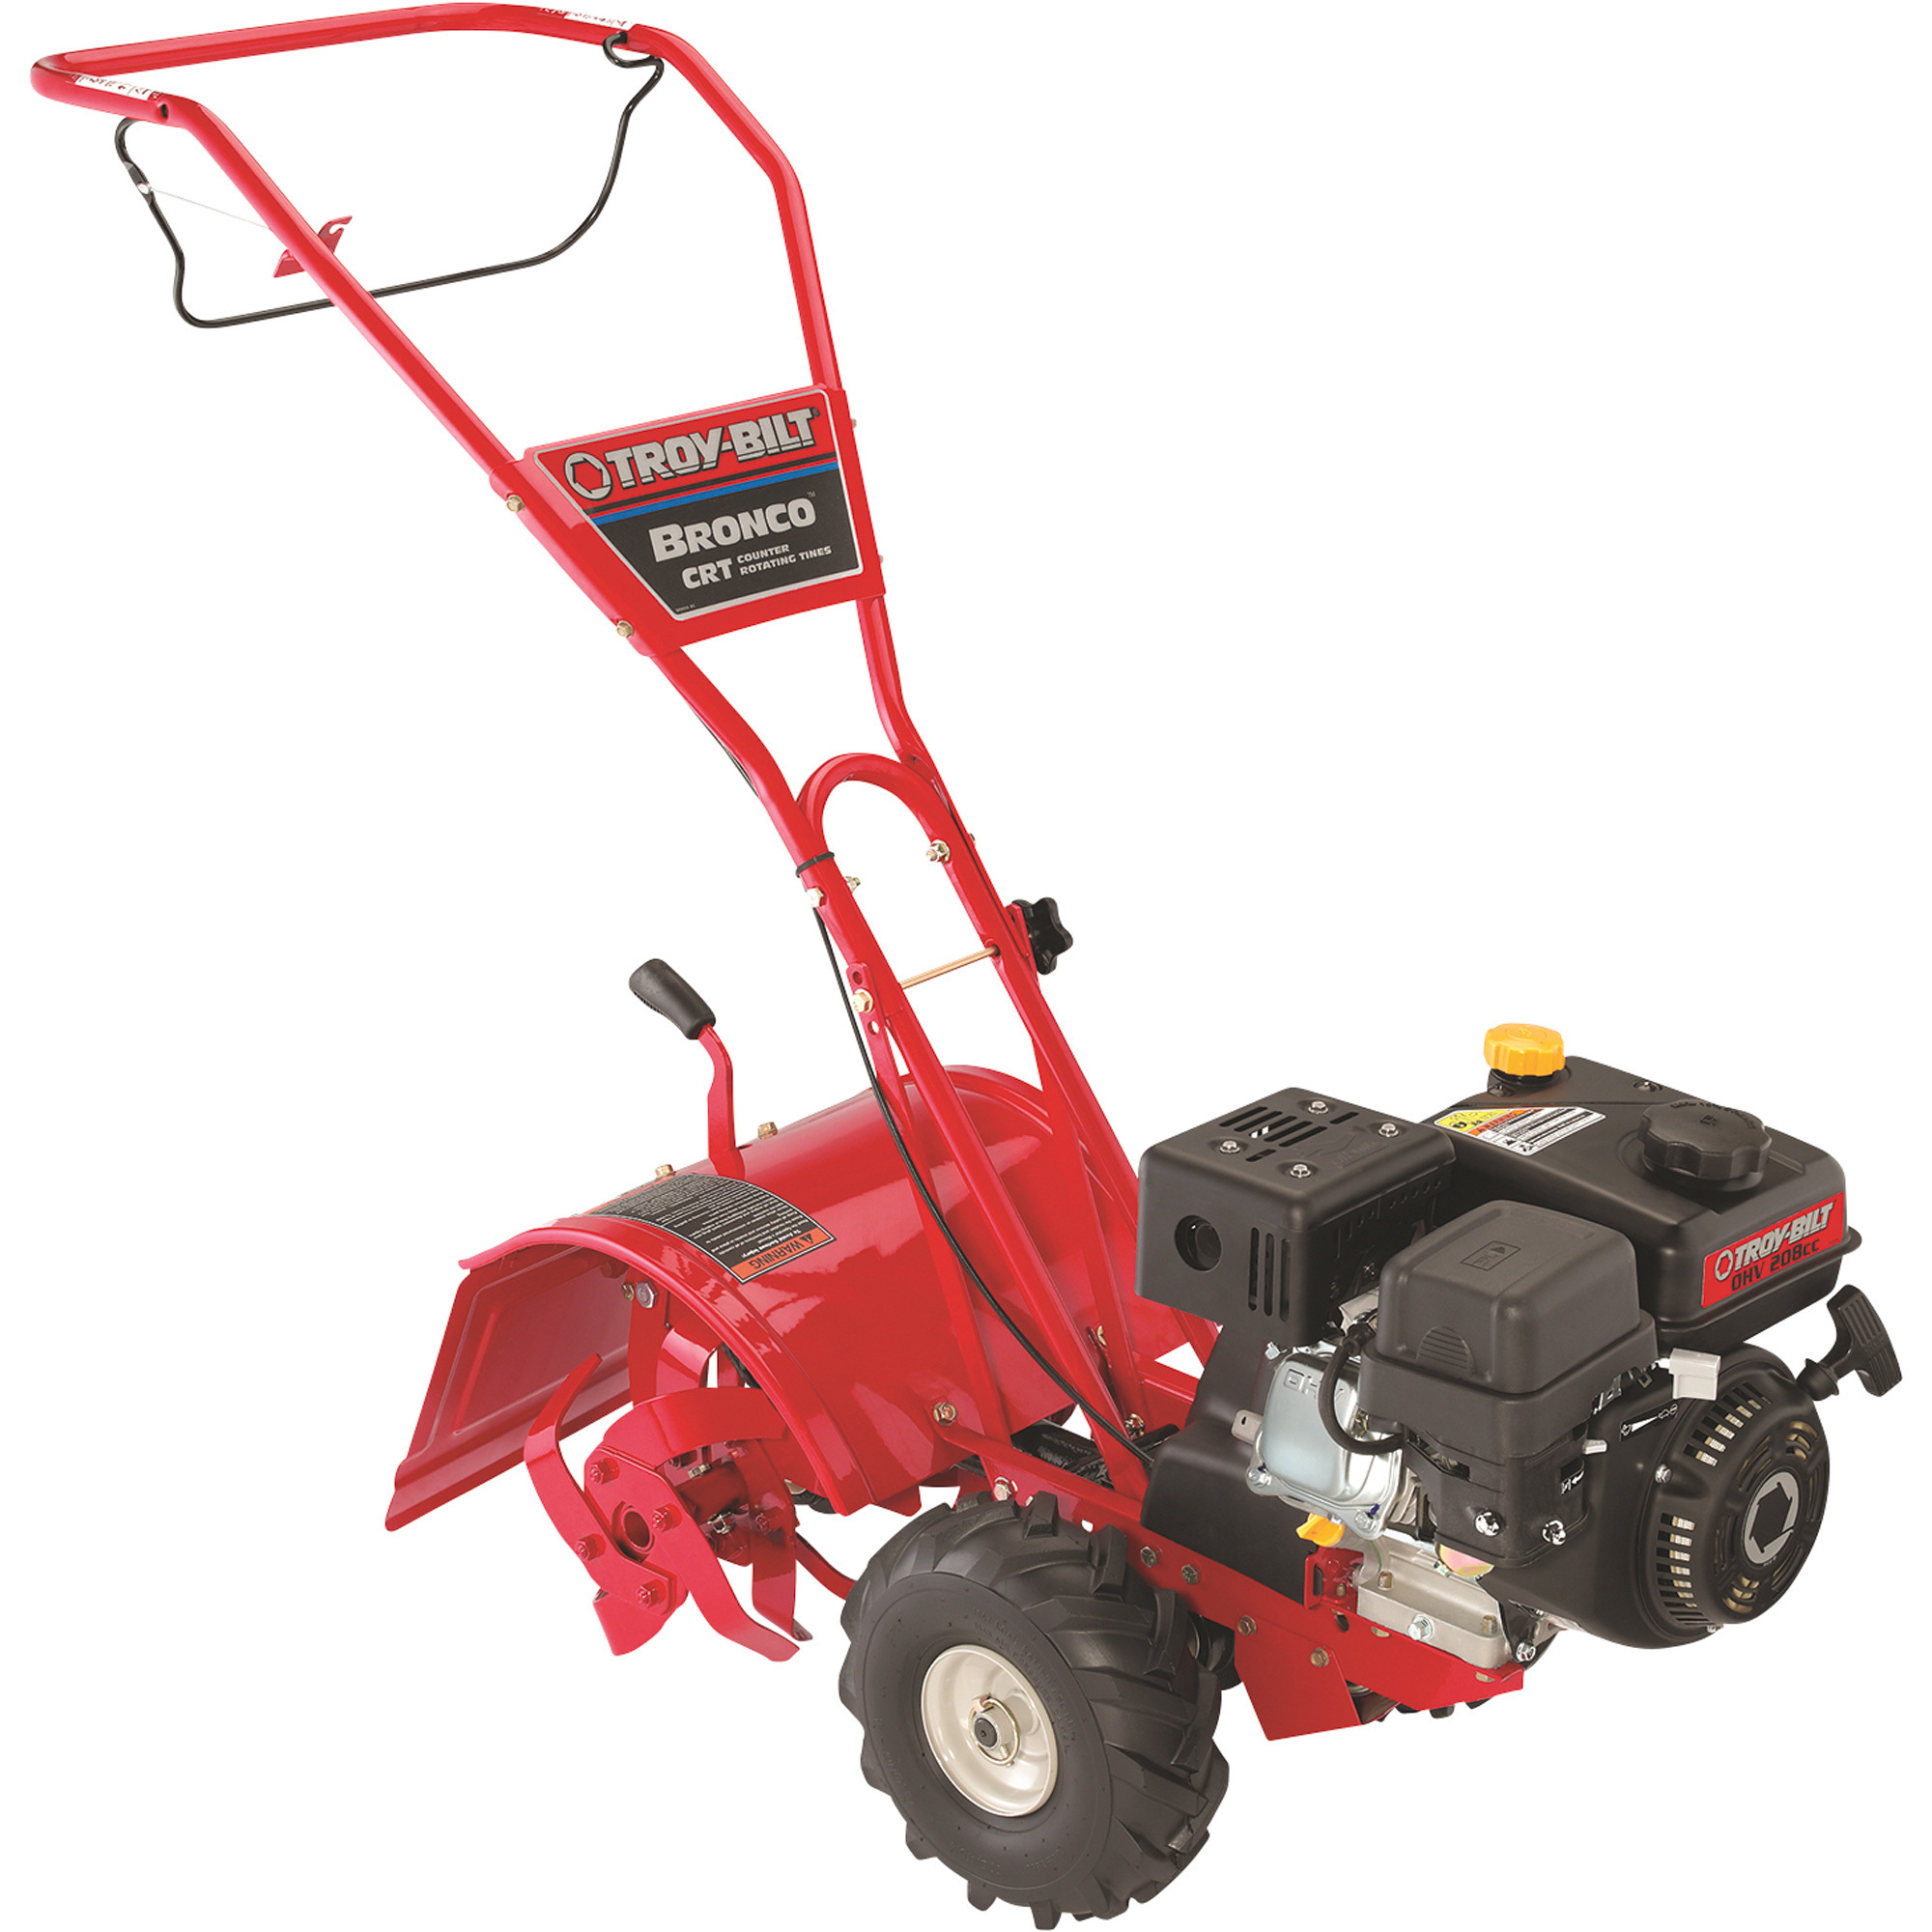 Troy-Bilt Bronco Counter-Rotating Rear Tine Tiller, 14Inch Working Width, 208cc Powermore OHV Engine, Model 21D-64M8766